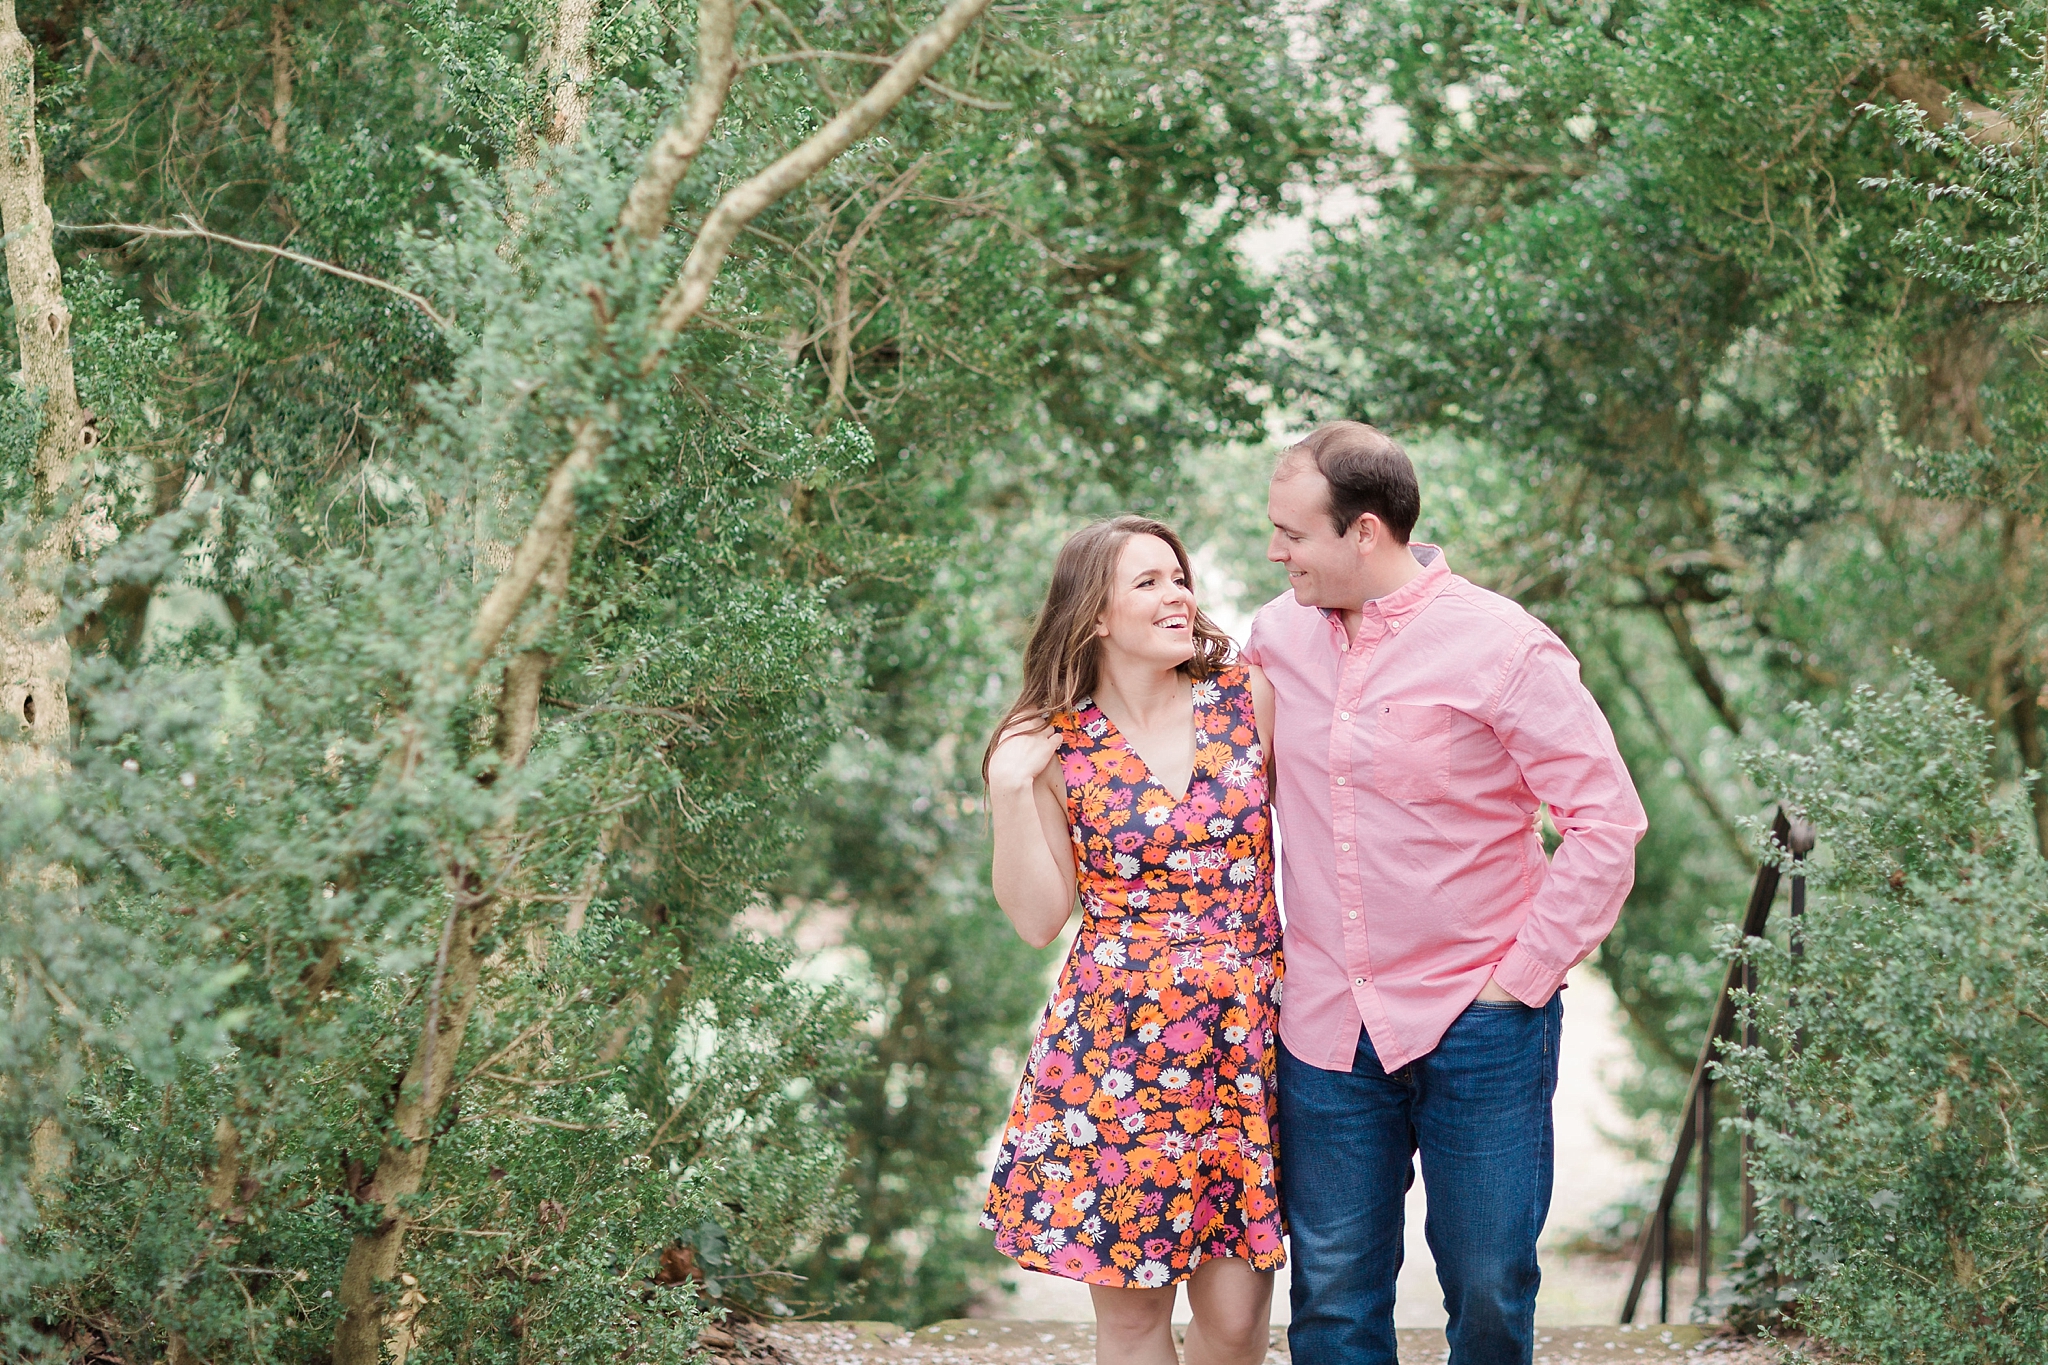 A lovely engagement session in the gardens of Oatlands Plantation Home in Leesburg, VA is captured by Washington, DC wedding photographer, Alicia Lacey.